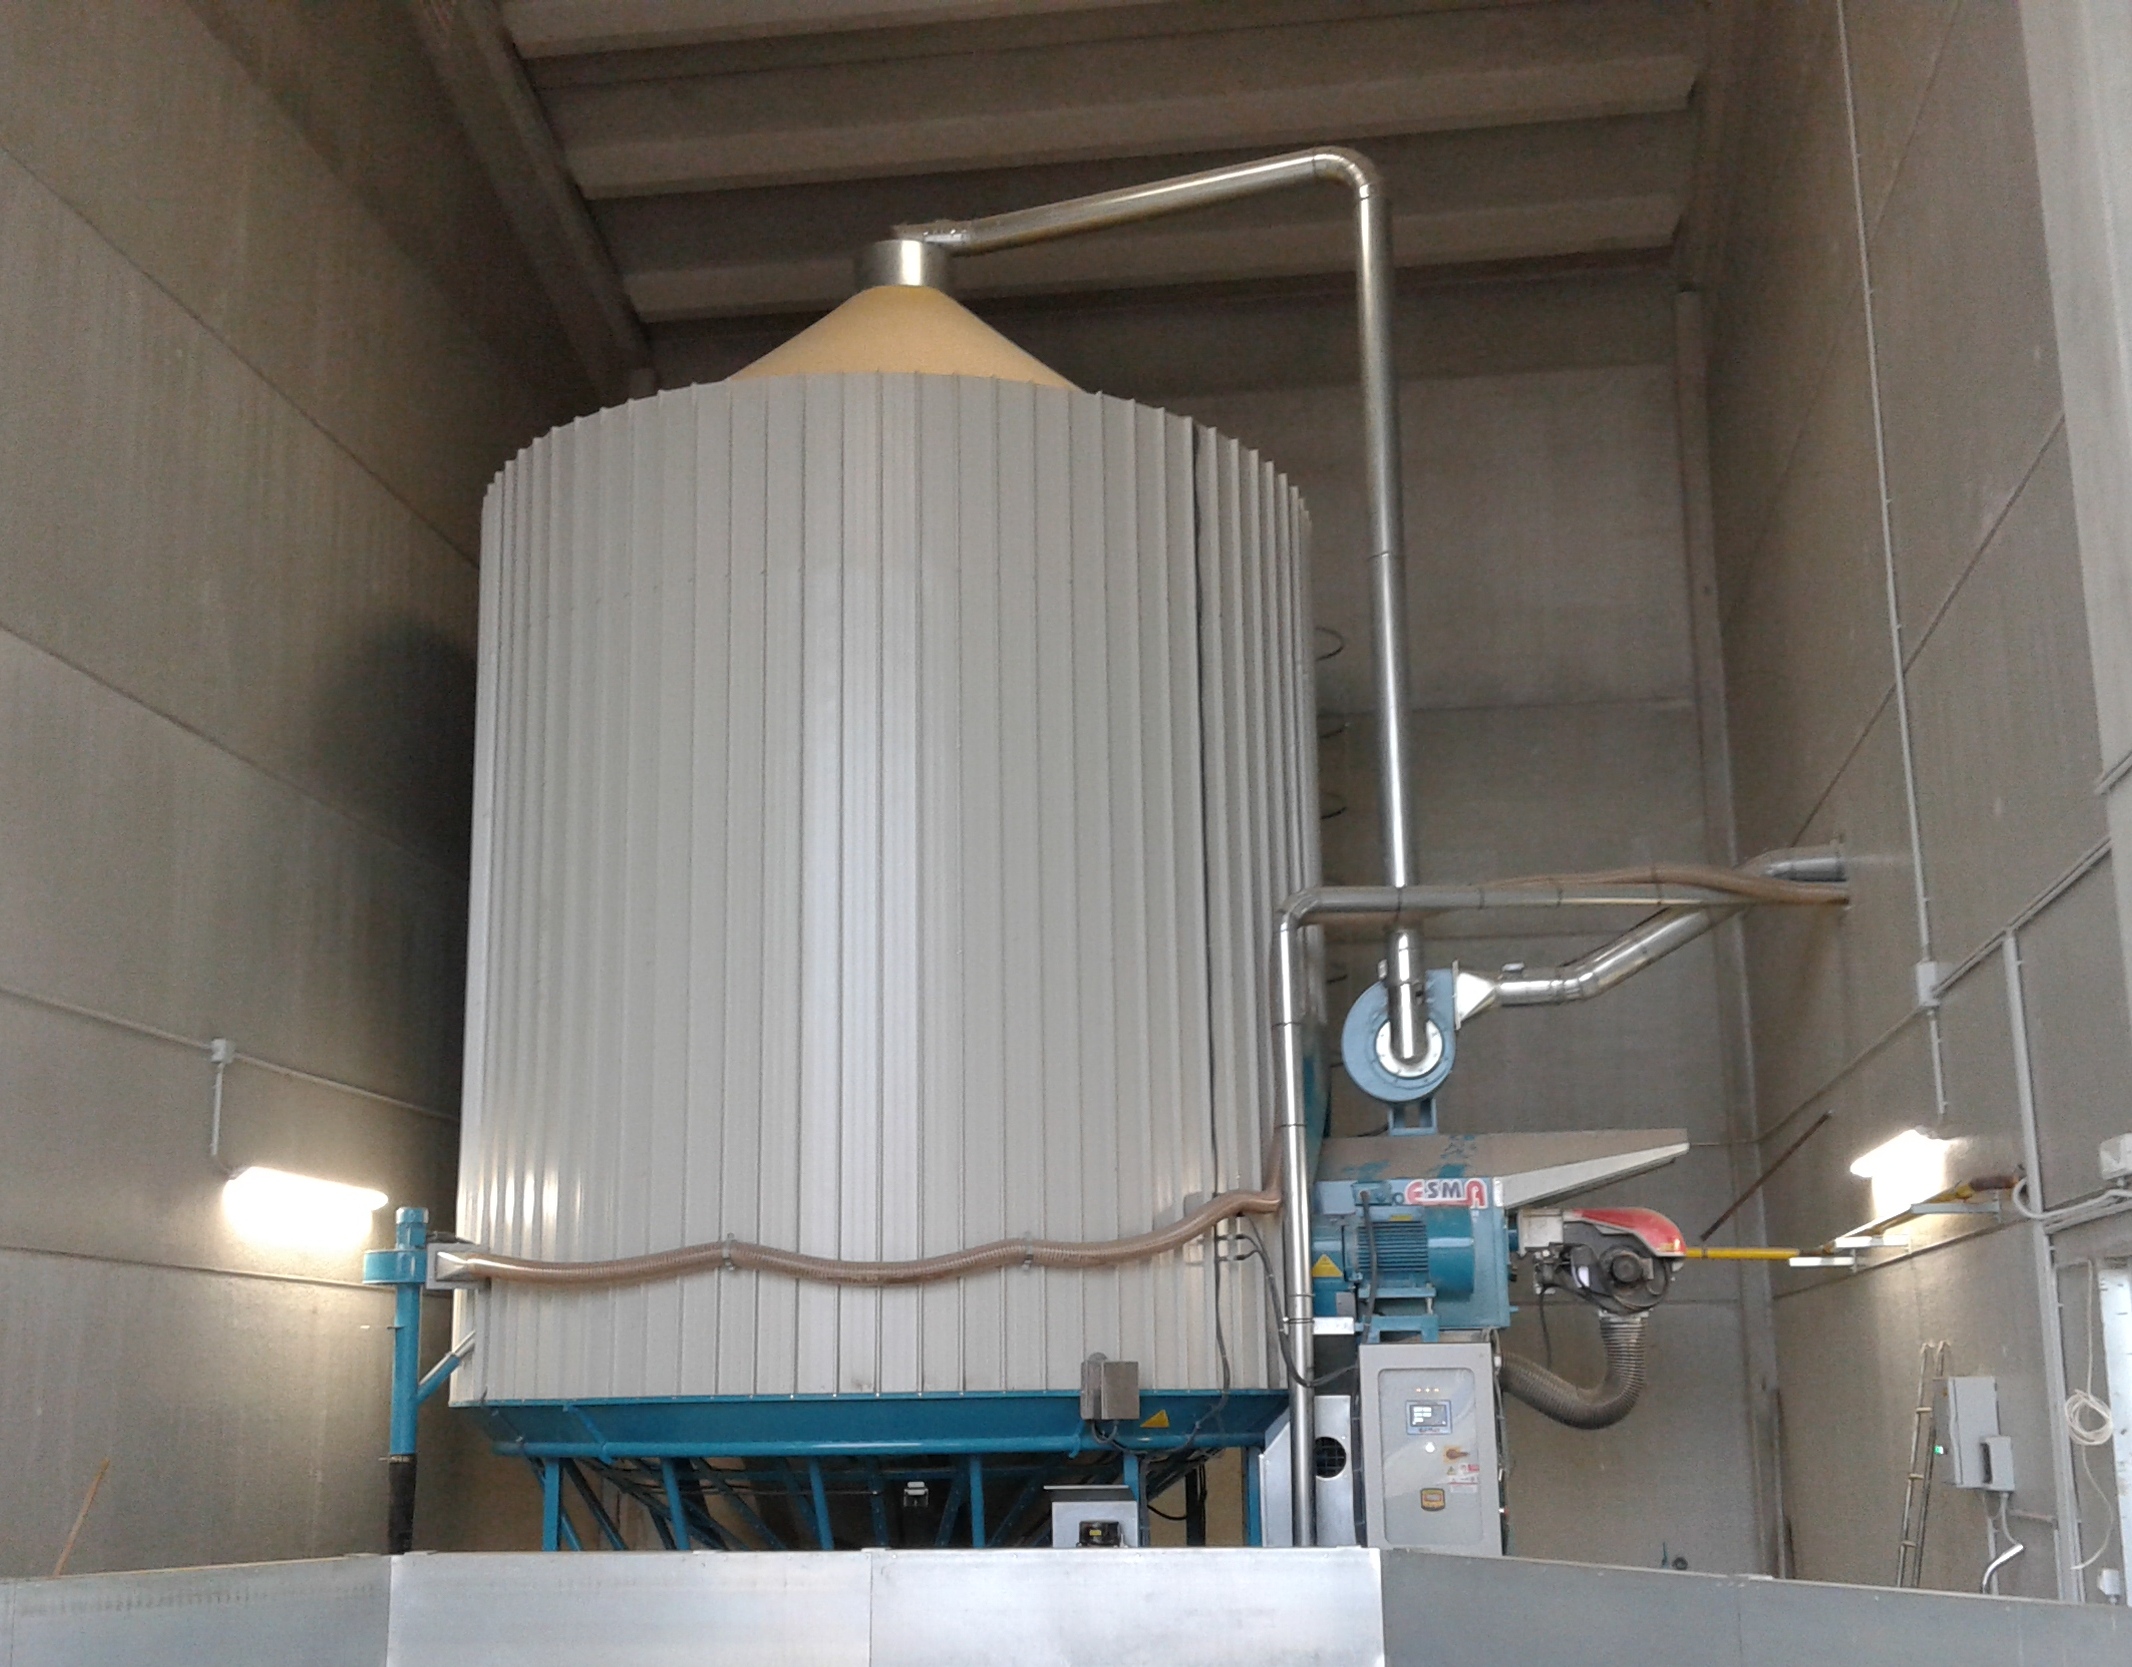 Esma grain dryers are selling all over Europe